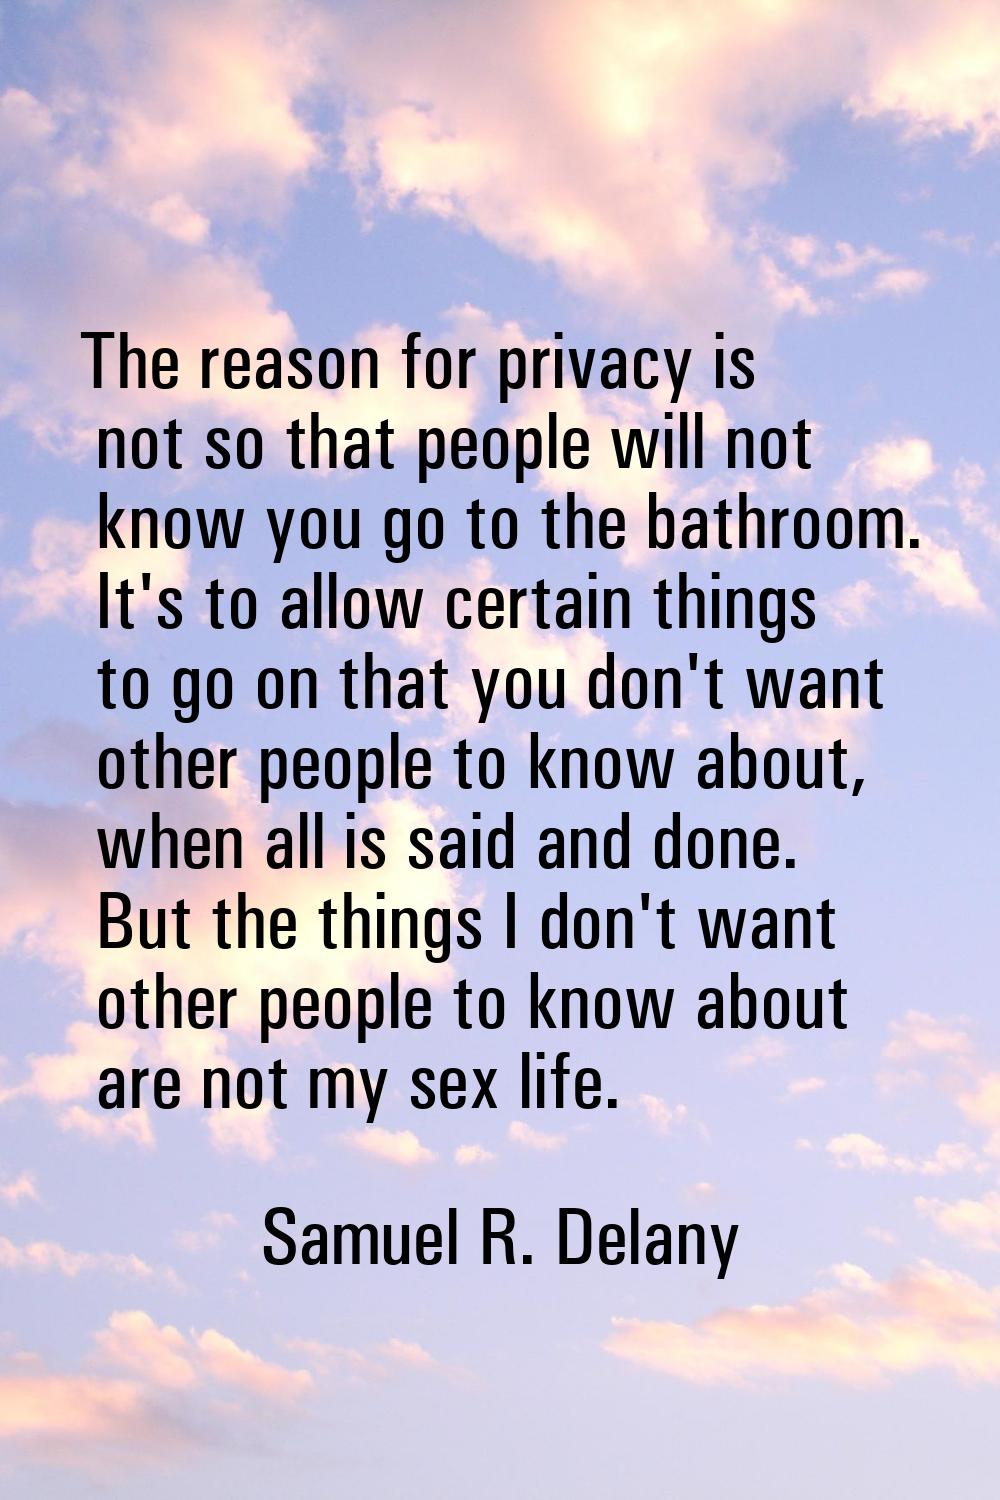 The reason for privacy is not so that people will not know you go to the bathroom. It's to allow ce